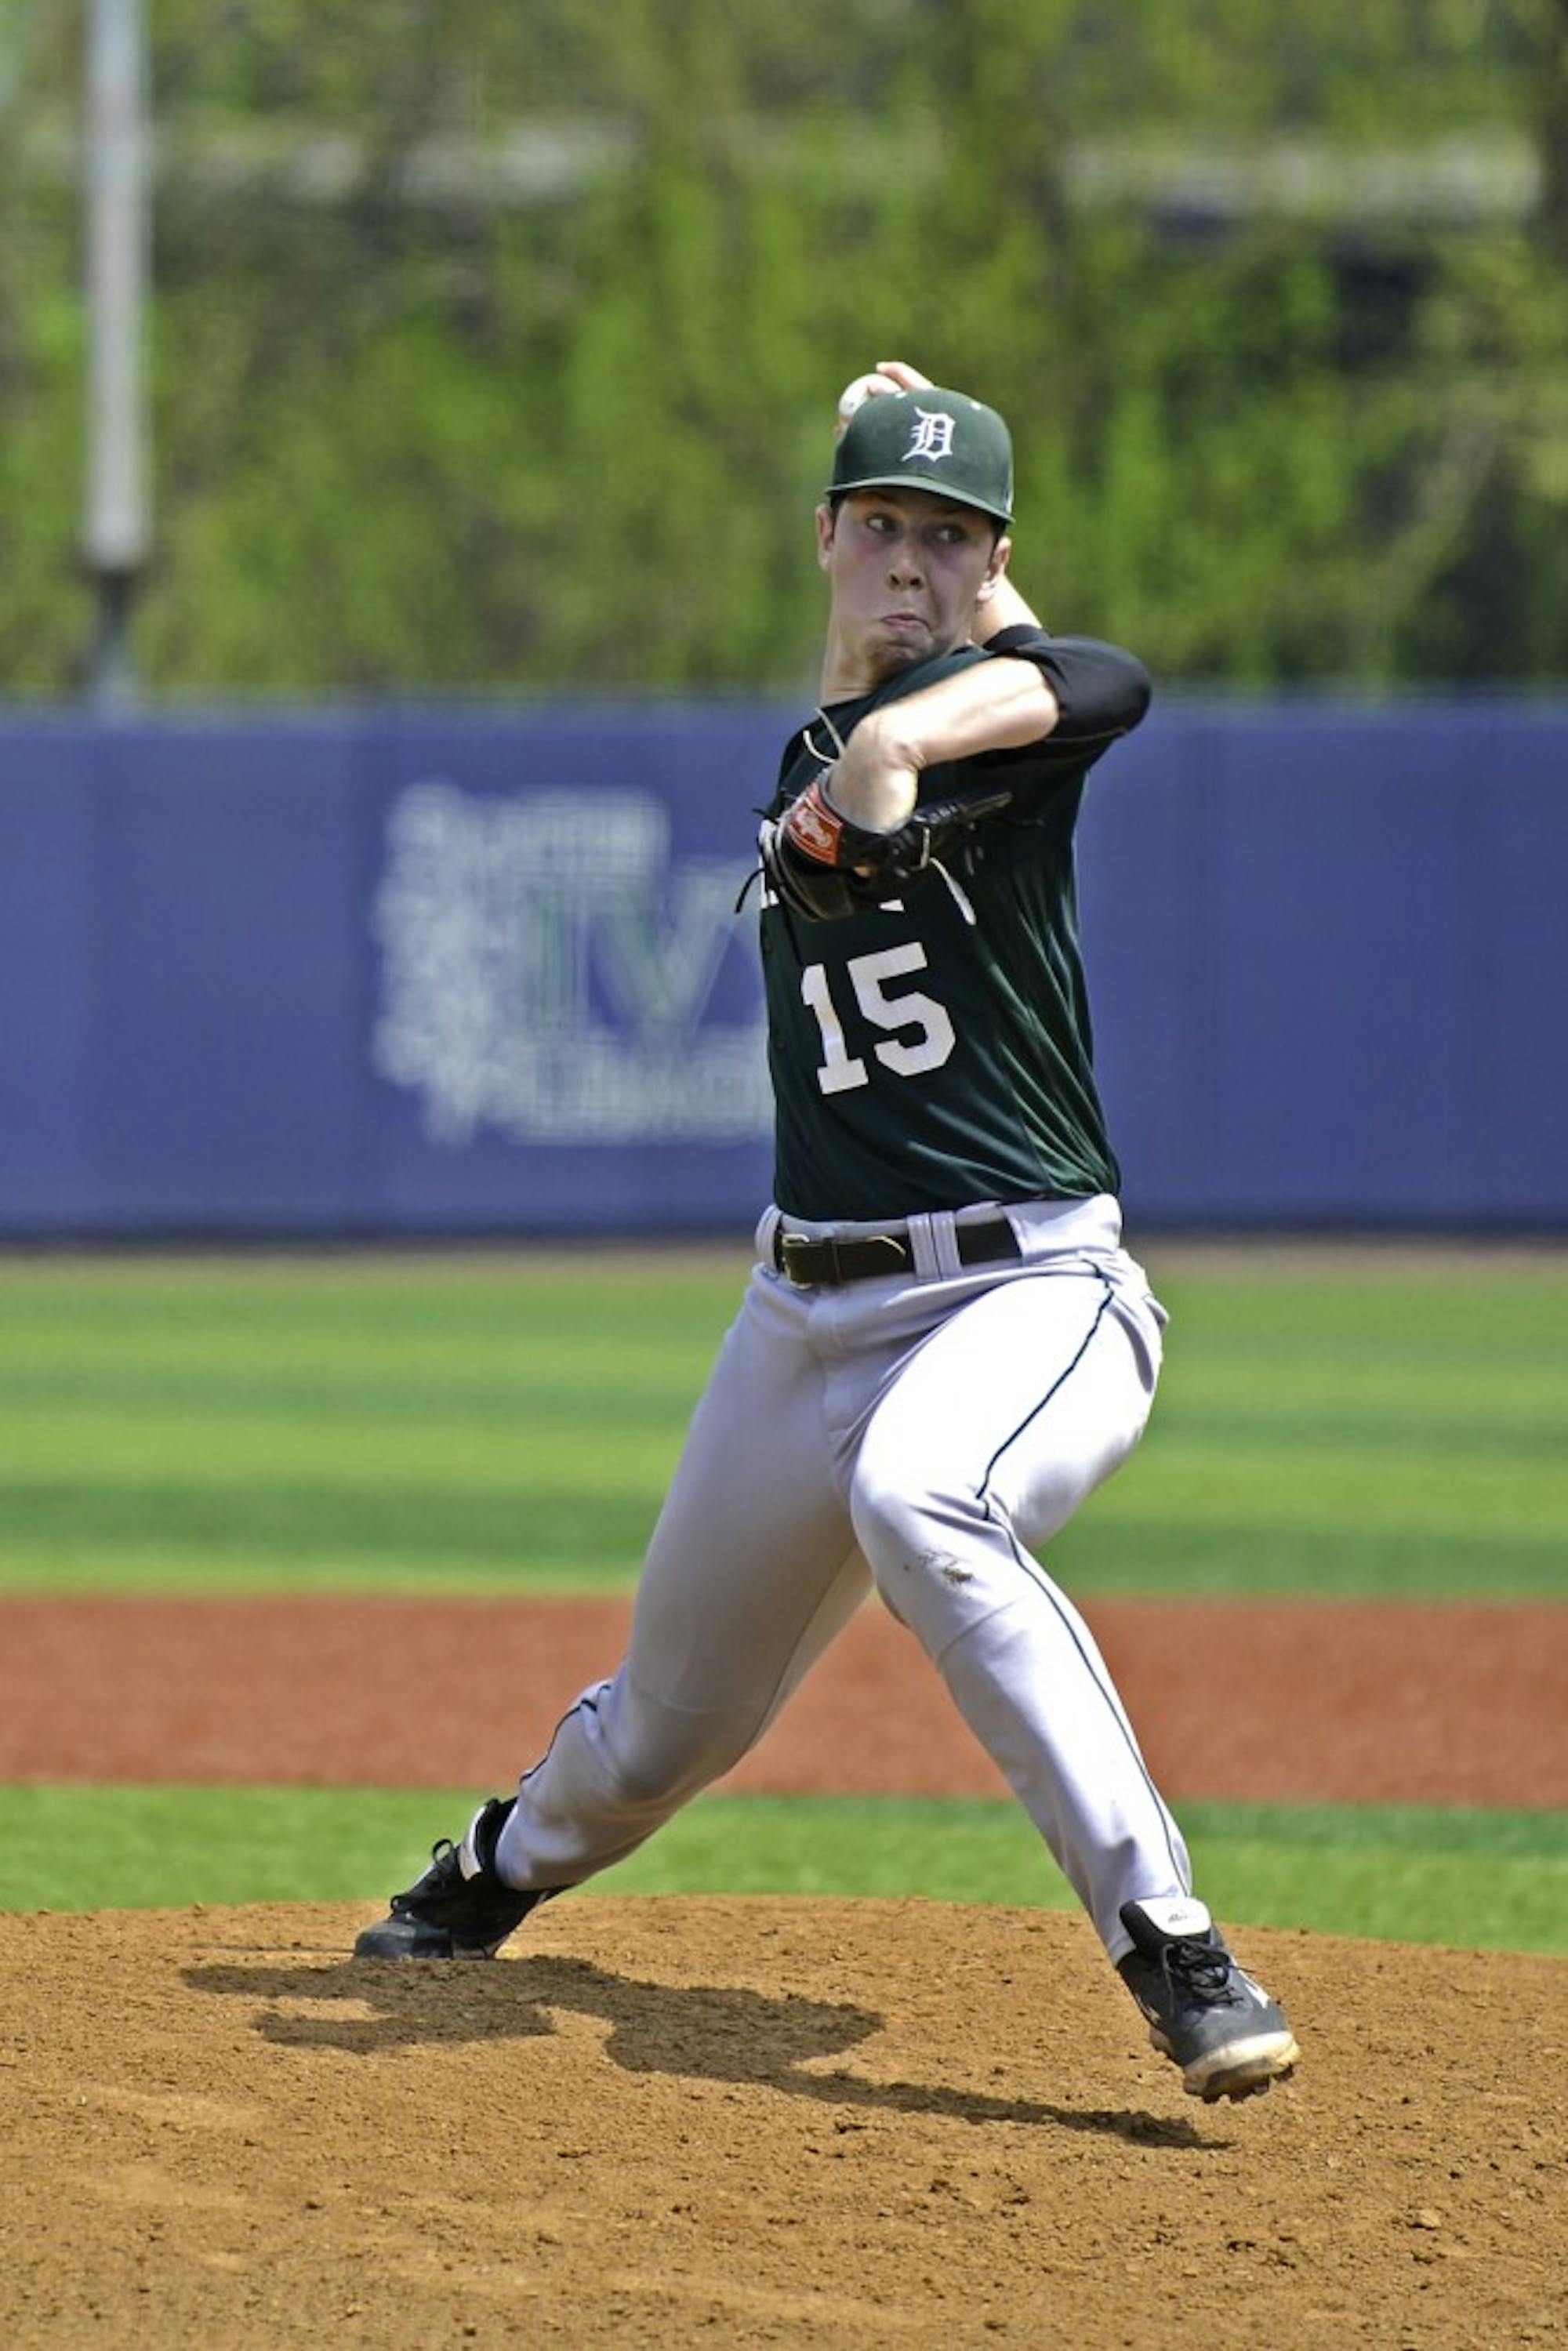 Two of Dartmouth’s starting pitchers are out with season-ending injuries.